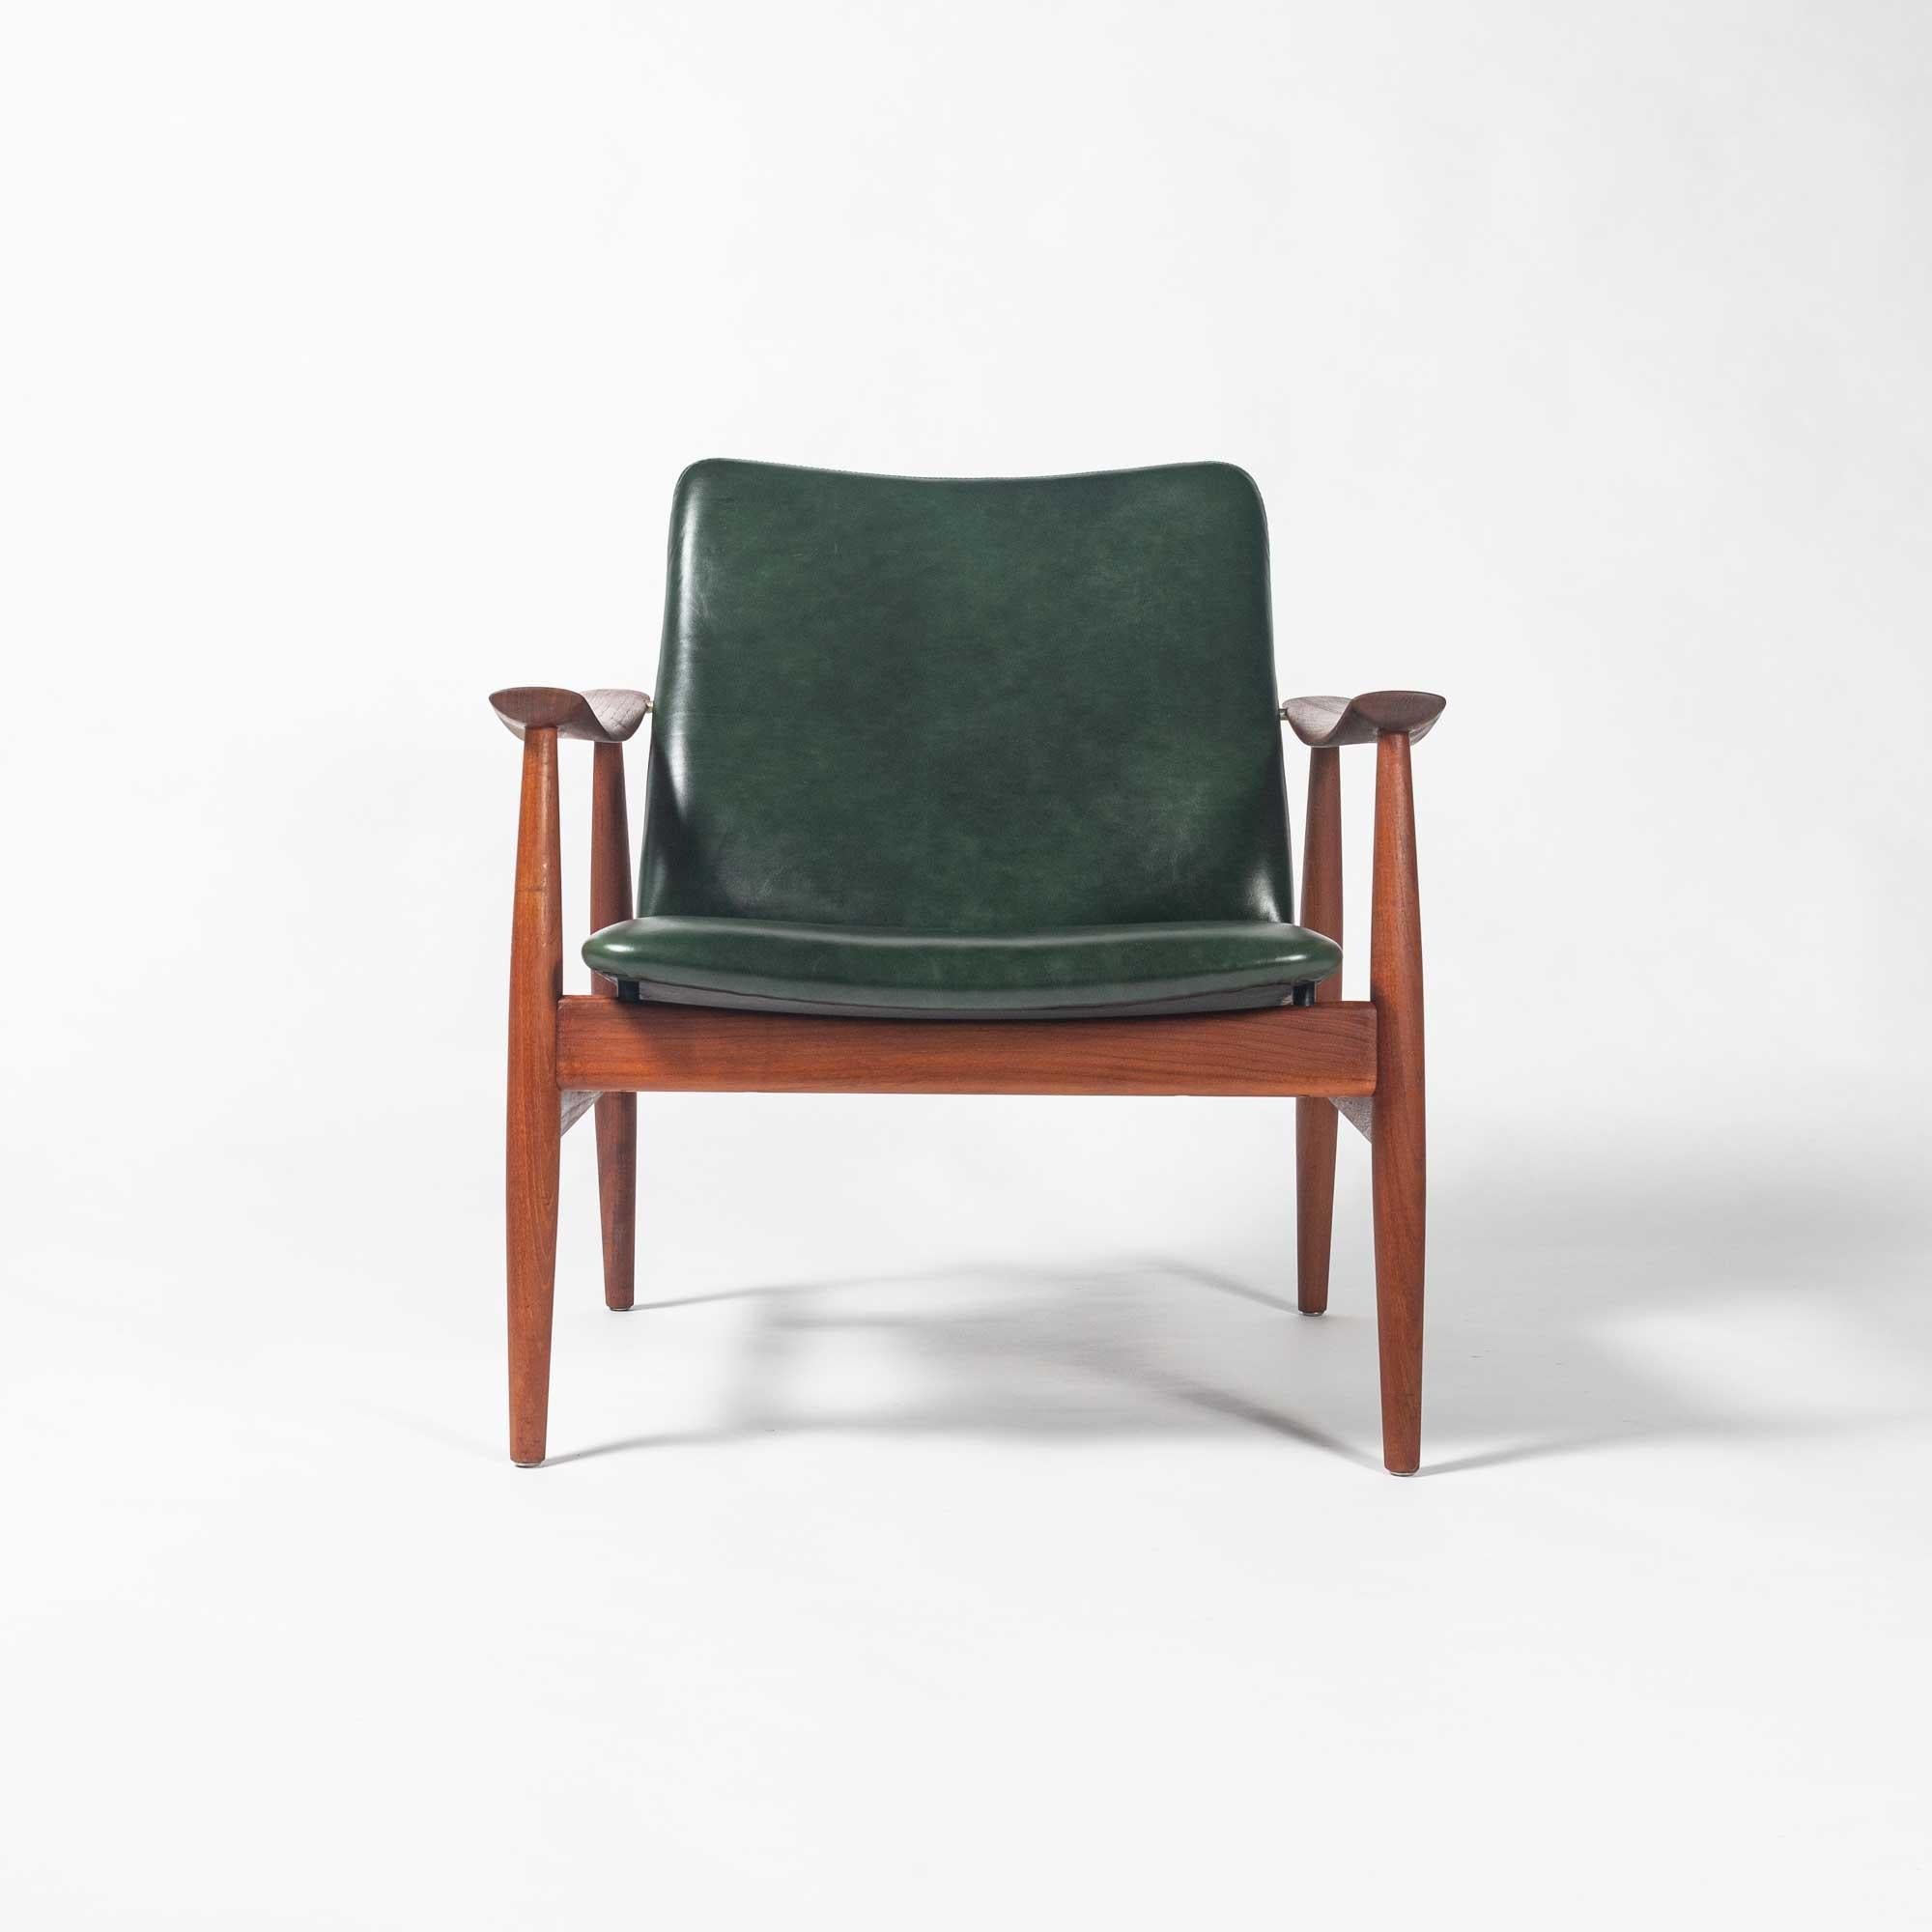 Finn Juhl’s Model FD138 chair for France & Son is an understated and elegant lounge chair in his collection. The backrest independently pivots depend on the seating position. 
This particular model is made out of solid teak, fully restored and